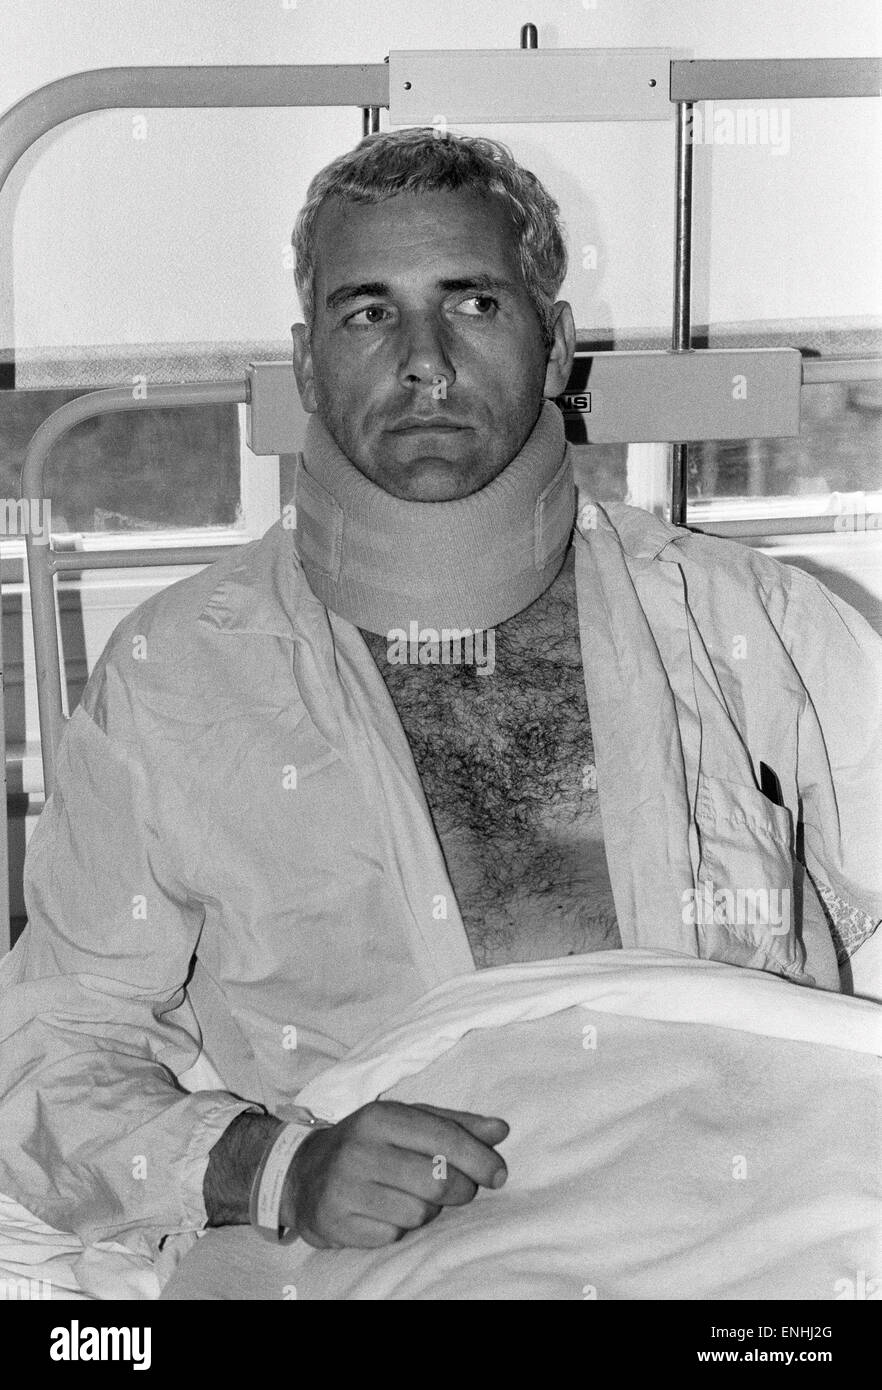 Police Sergeant Dennis Dorrington in Whittington Hospital with his neck in a collar, after he was injured in the Broadwater Farm riot in Tottenham, North London. 7th October 1985. Stock Photo